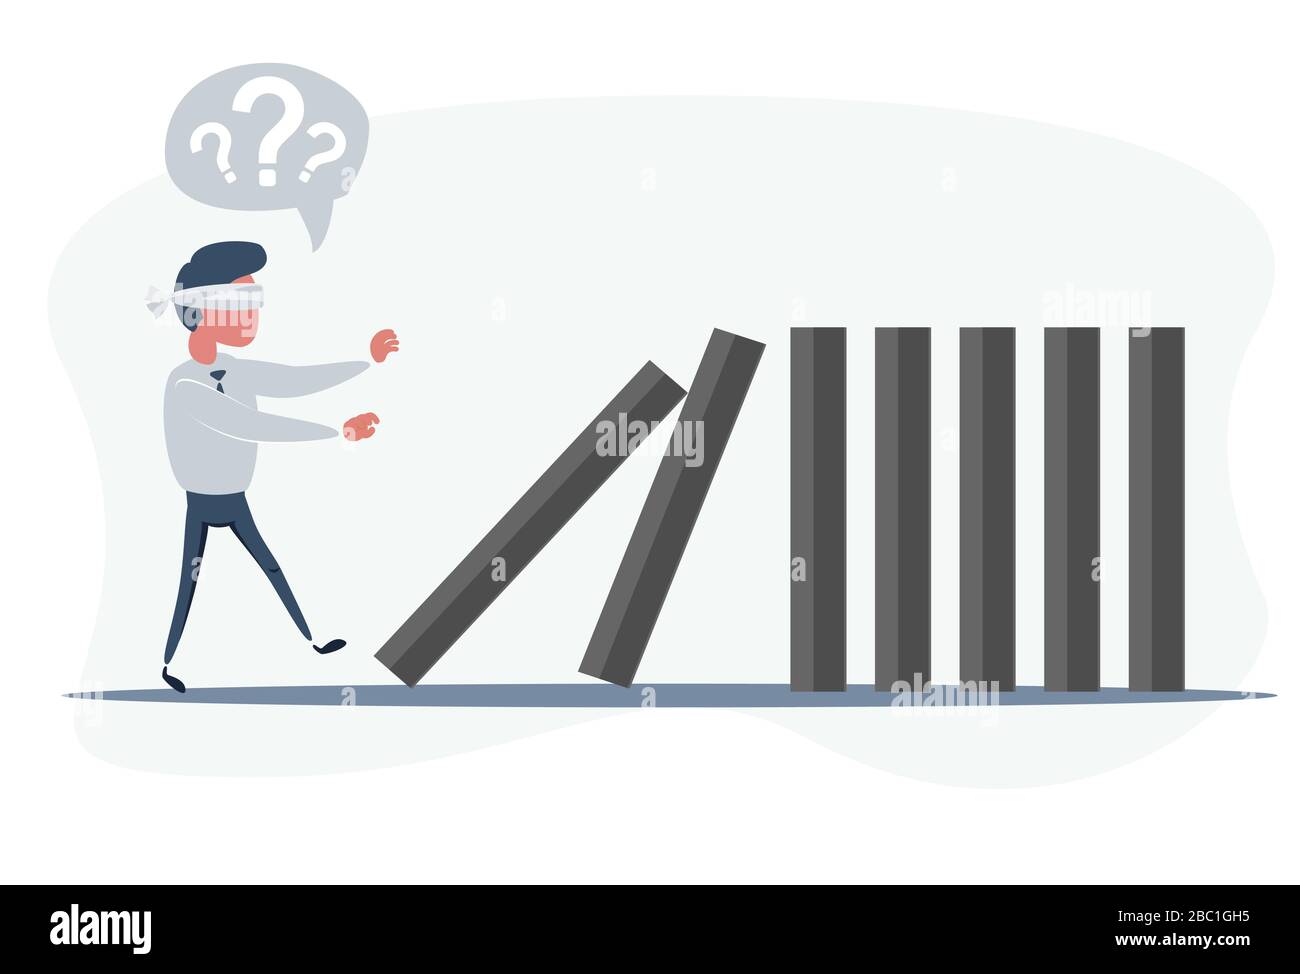 Domino effect - Business concept. Stock Vector